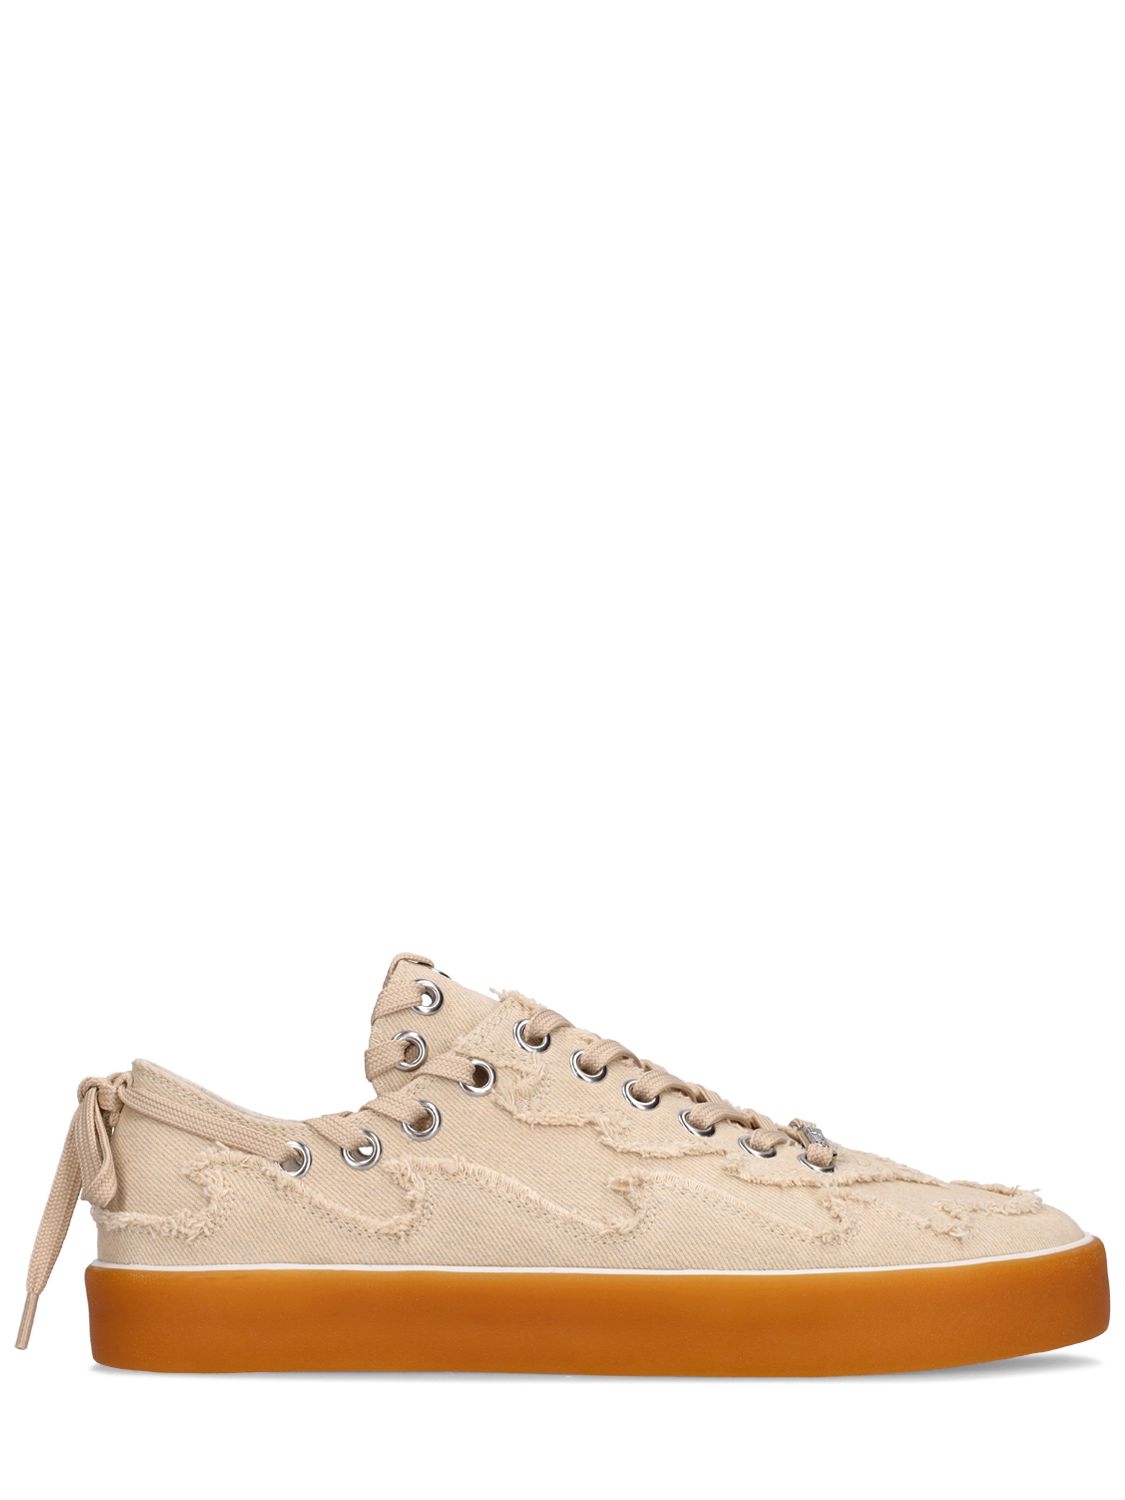 Destroyed Canvas Low-top Sneakers